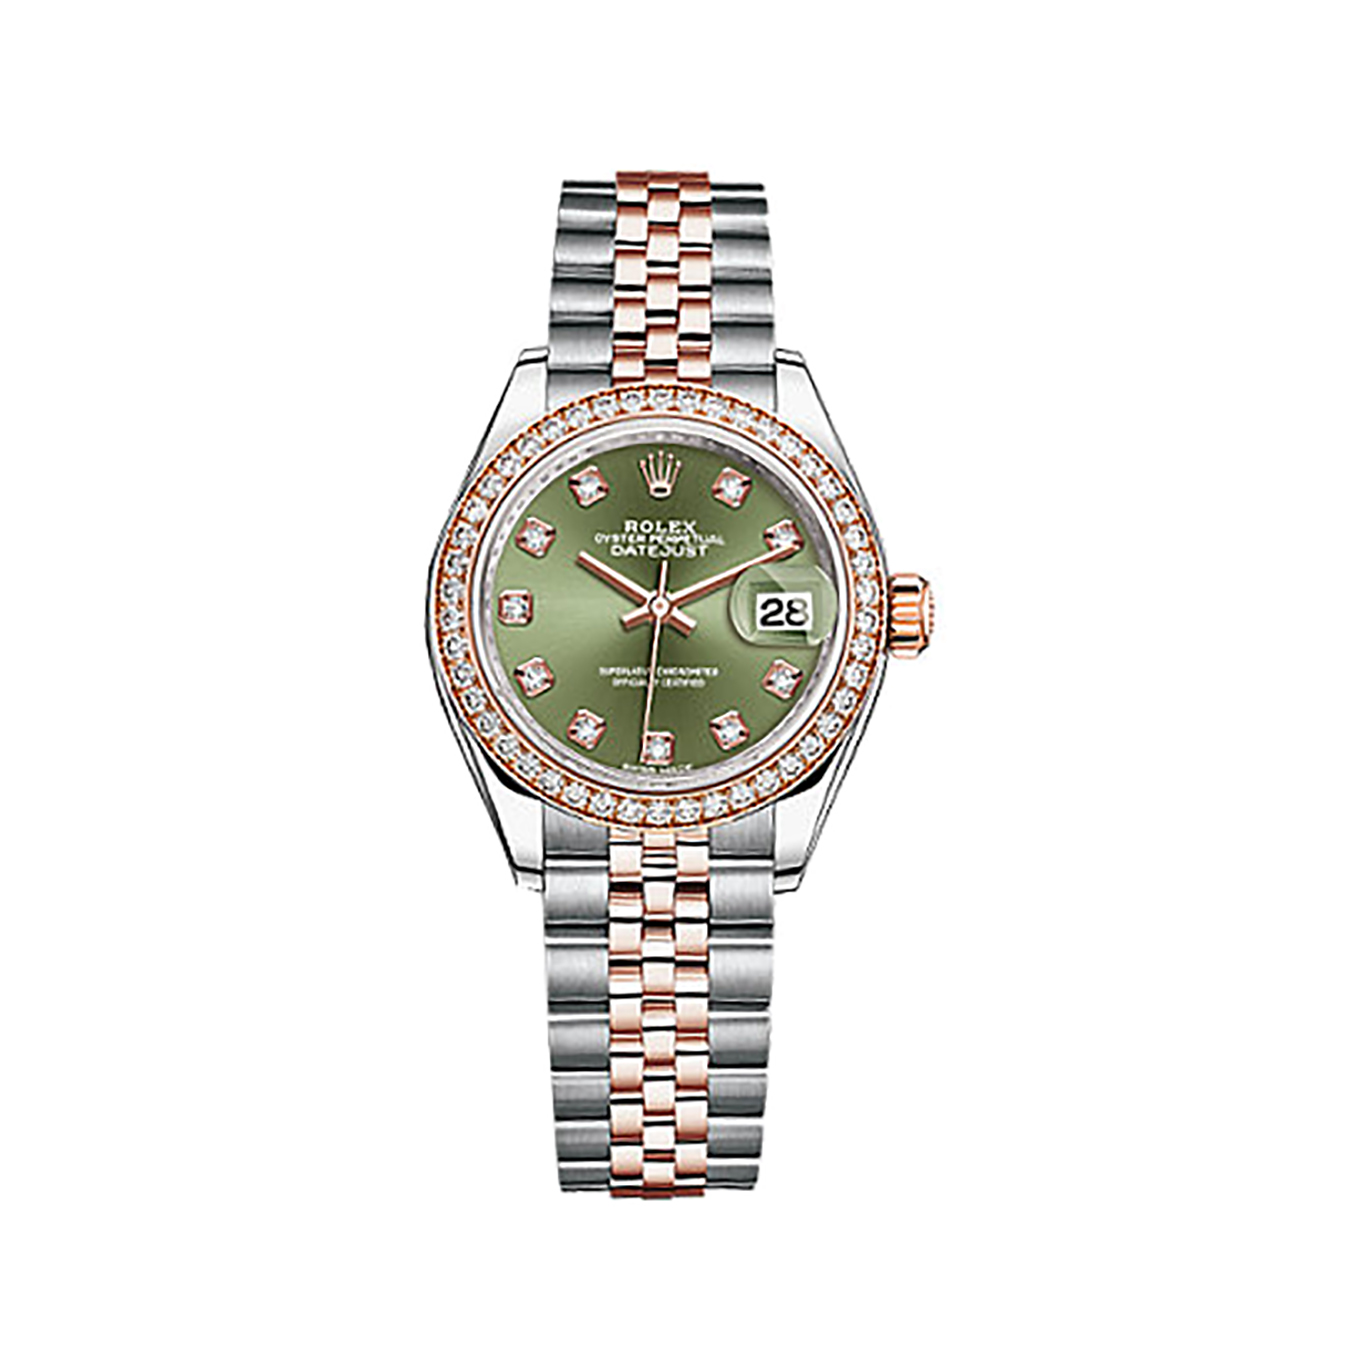 Lady-Datejust 28 279381RBR Rose Gold & Stainless Steel & Diamonds Watch (Olive Green Set with Diamonds)